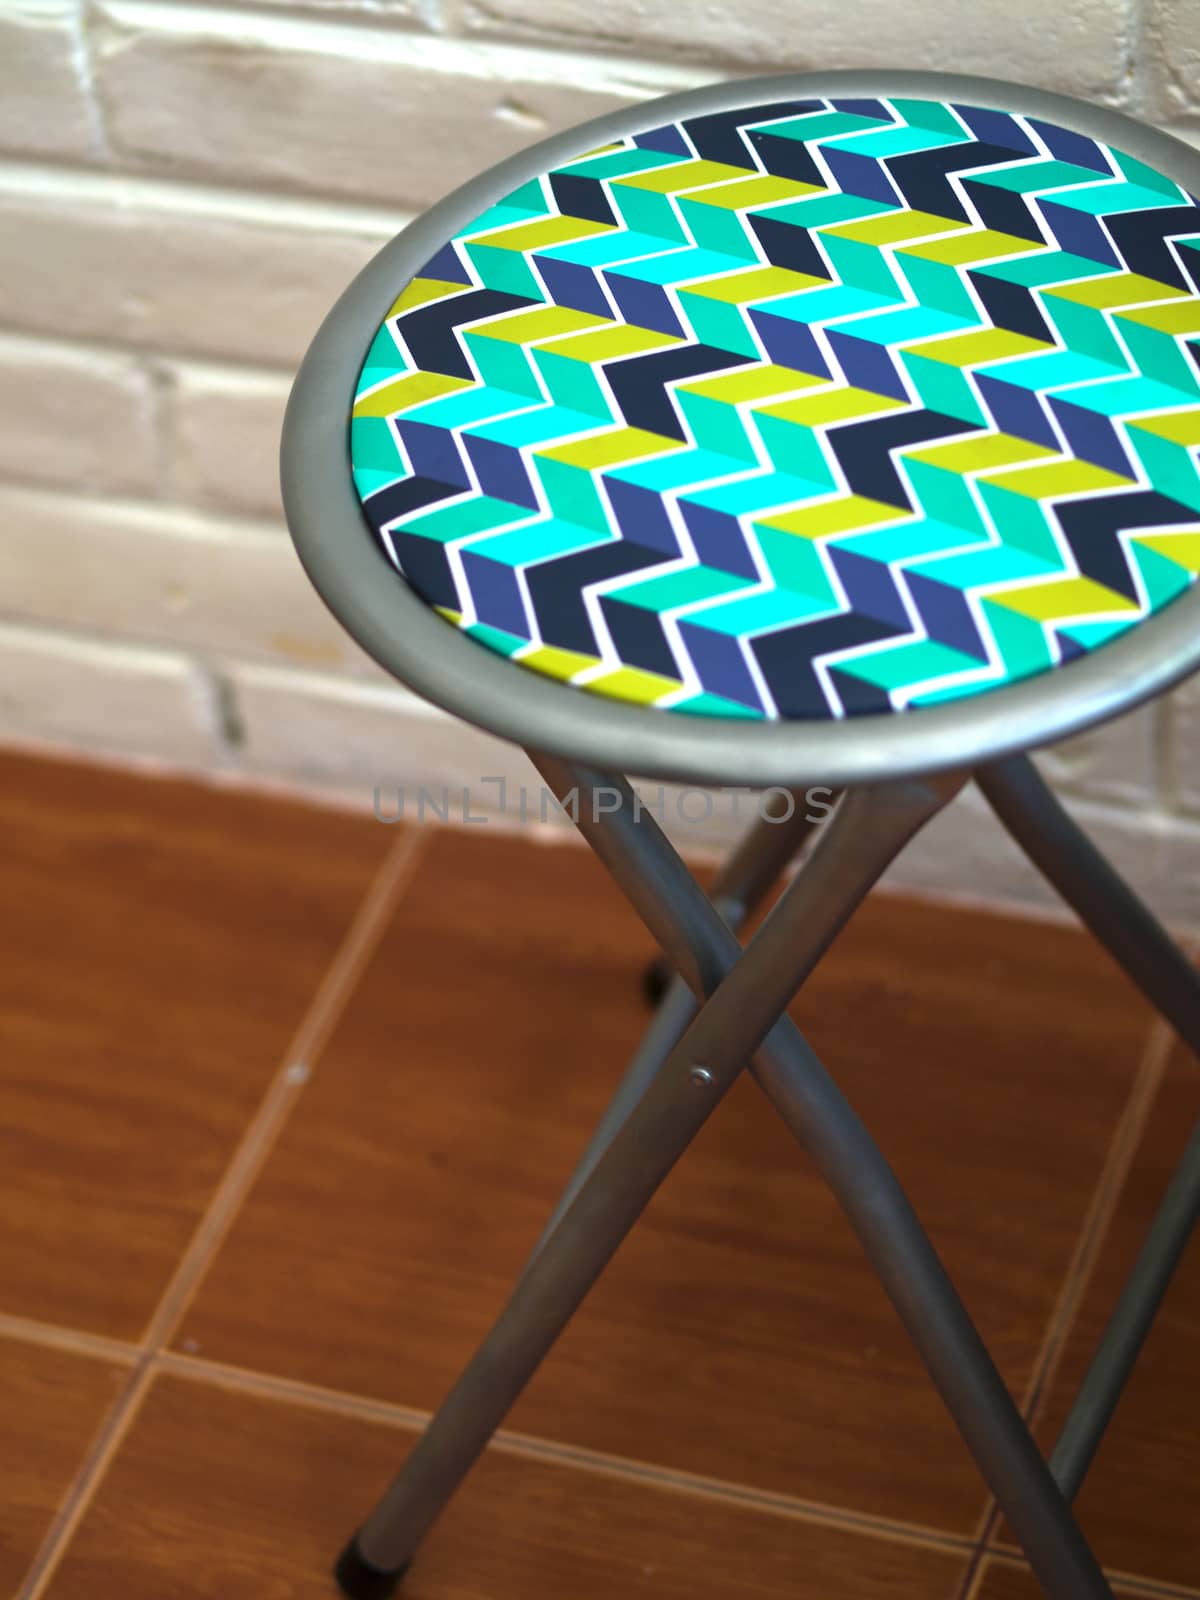 COLOR PHOTO OF STOOL WITH ZIG ZAG PATTERN LEATHER